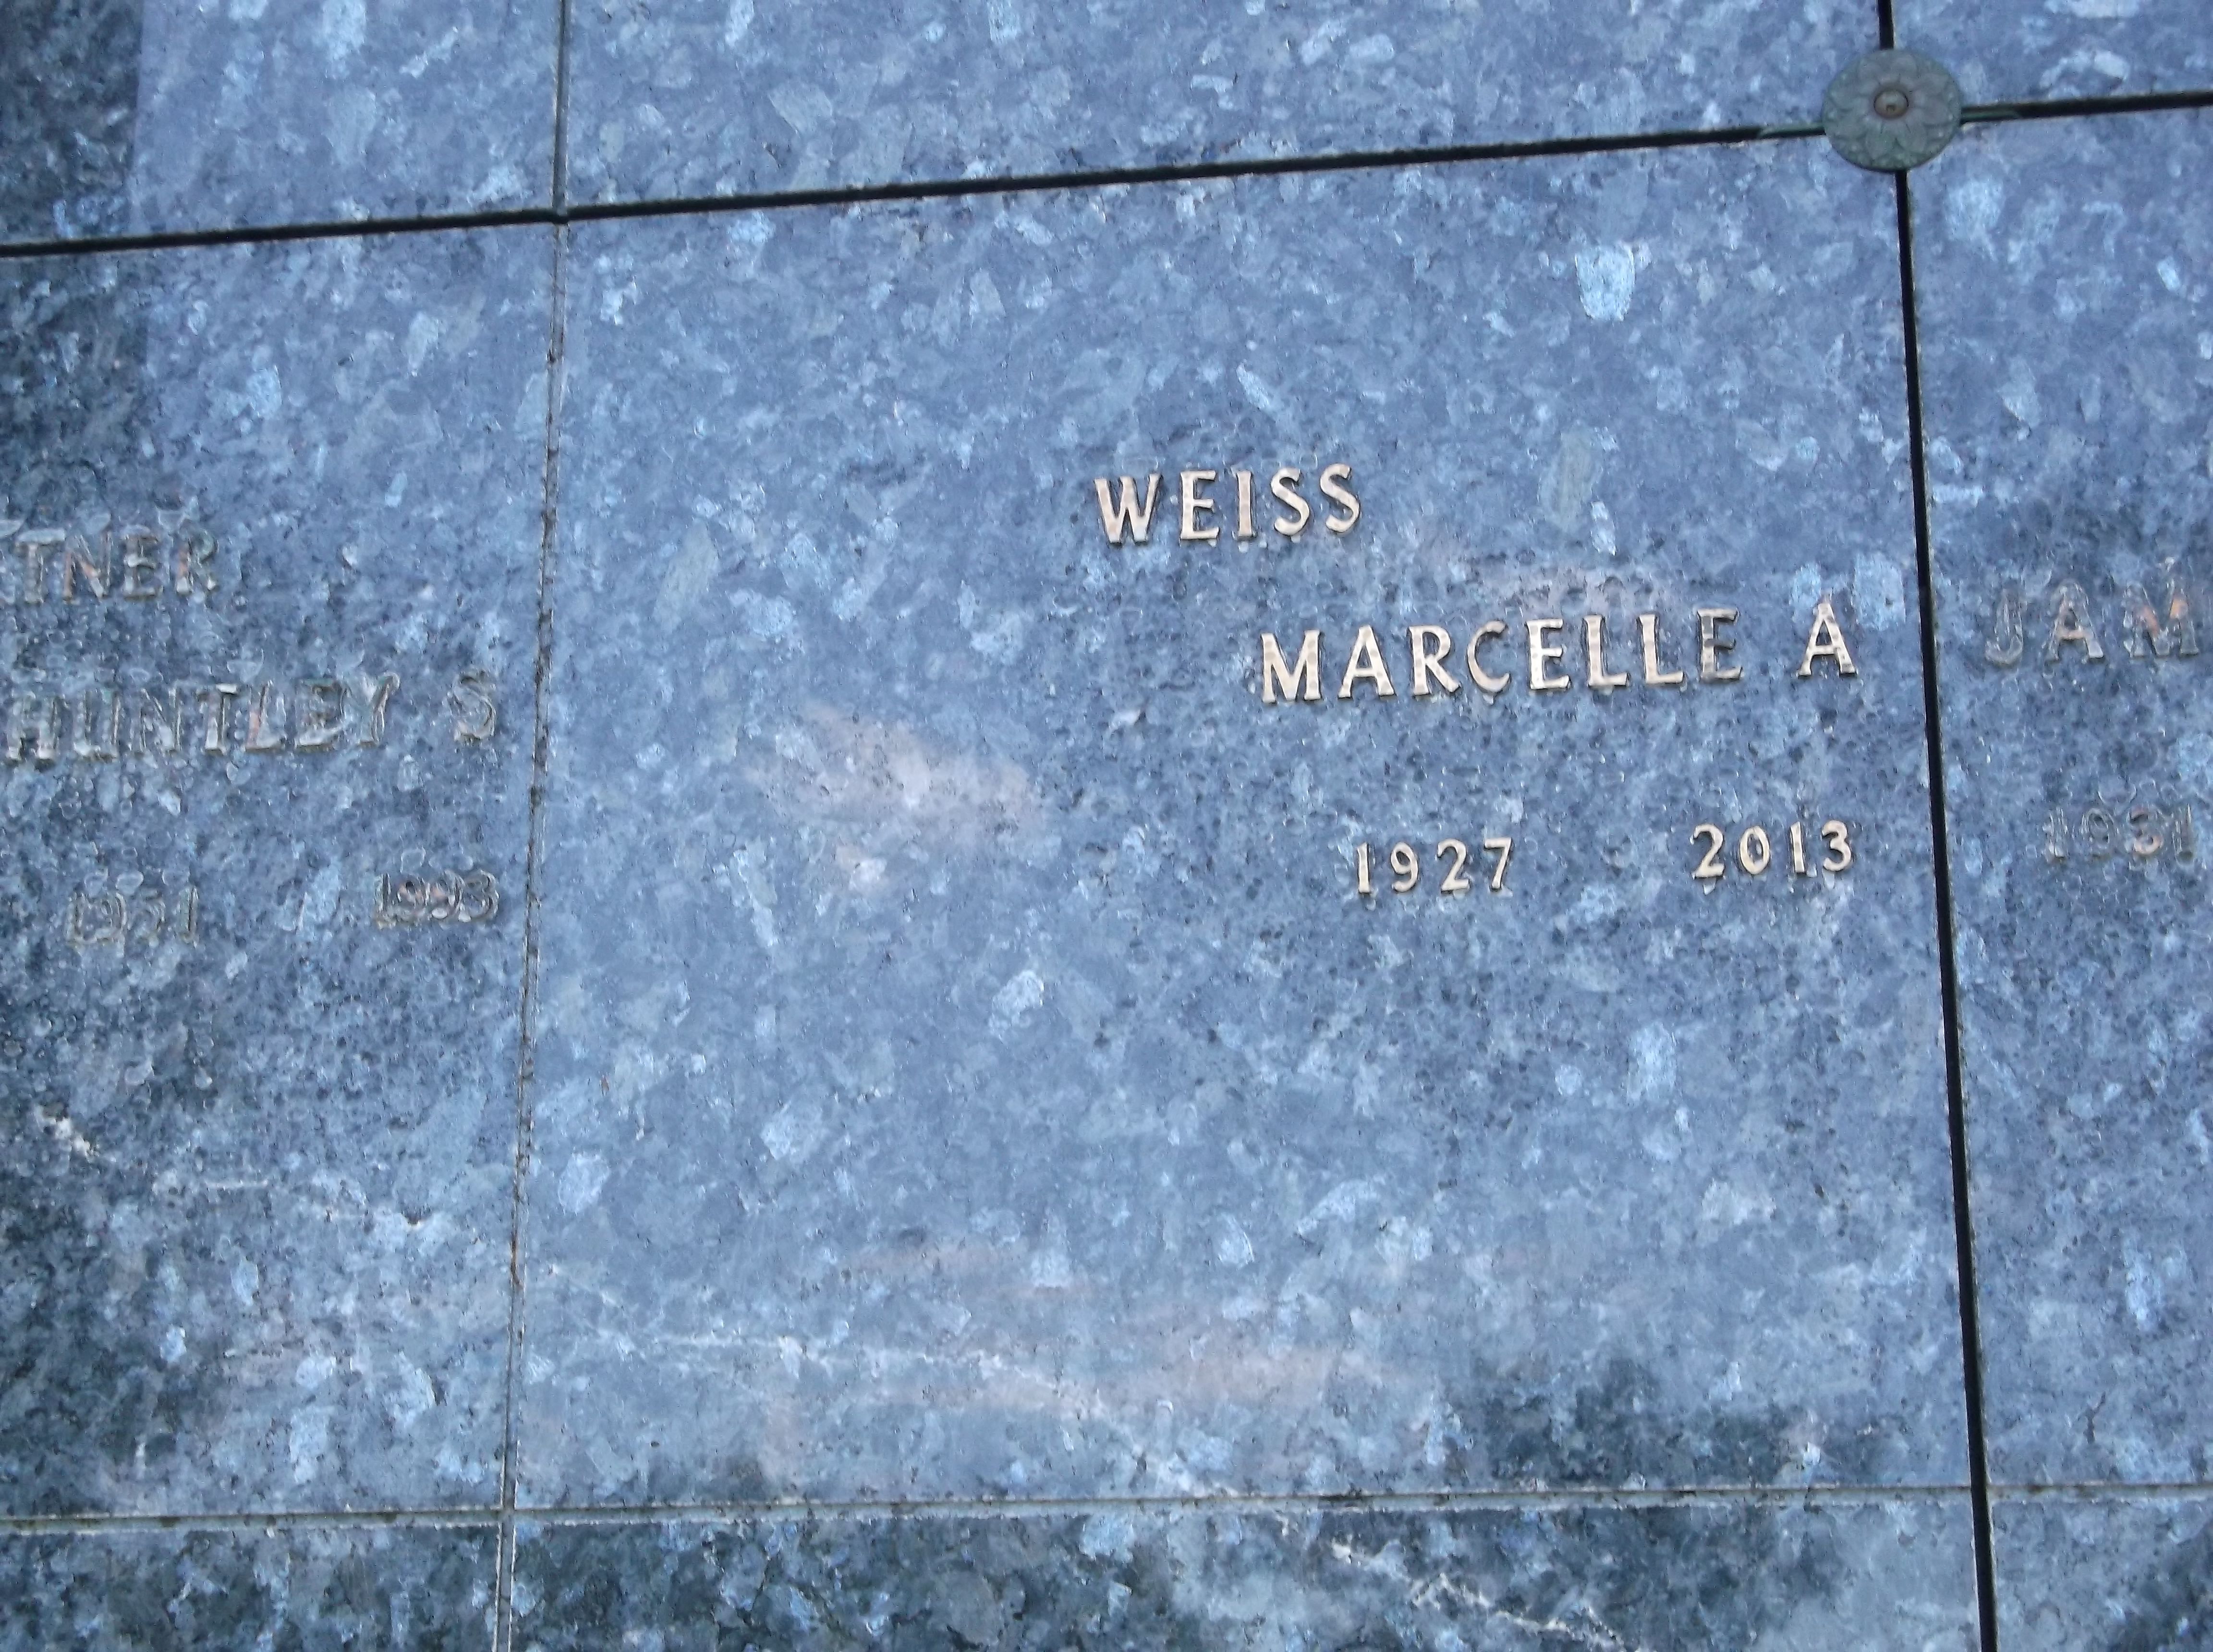 Marcelle A Weiss